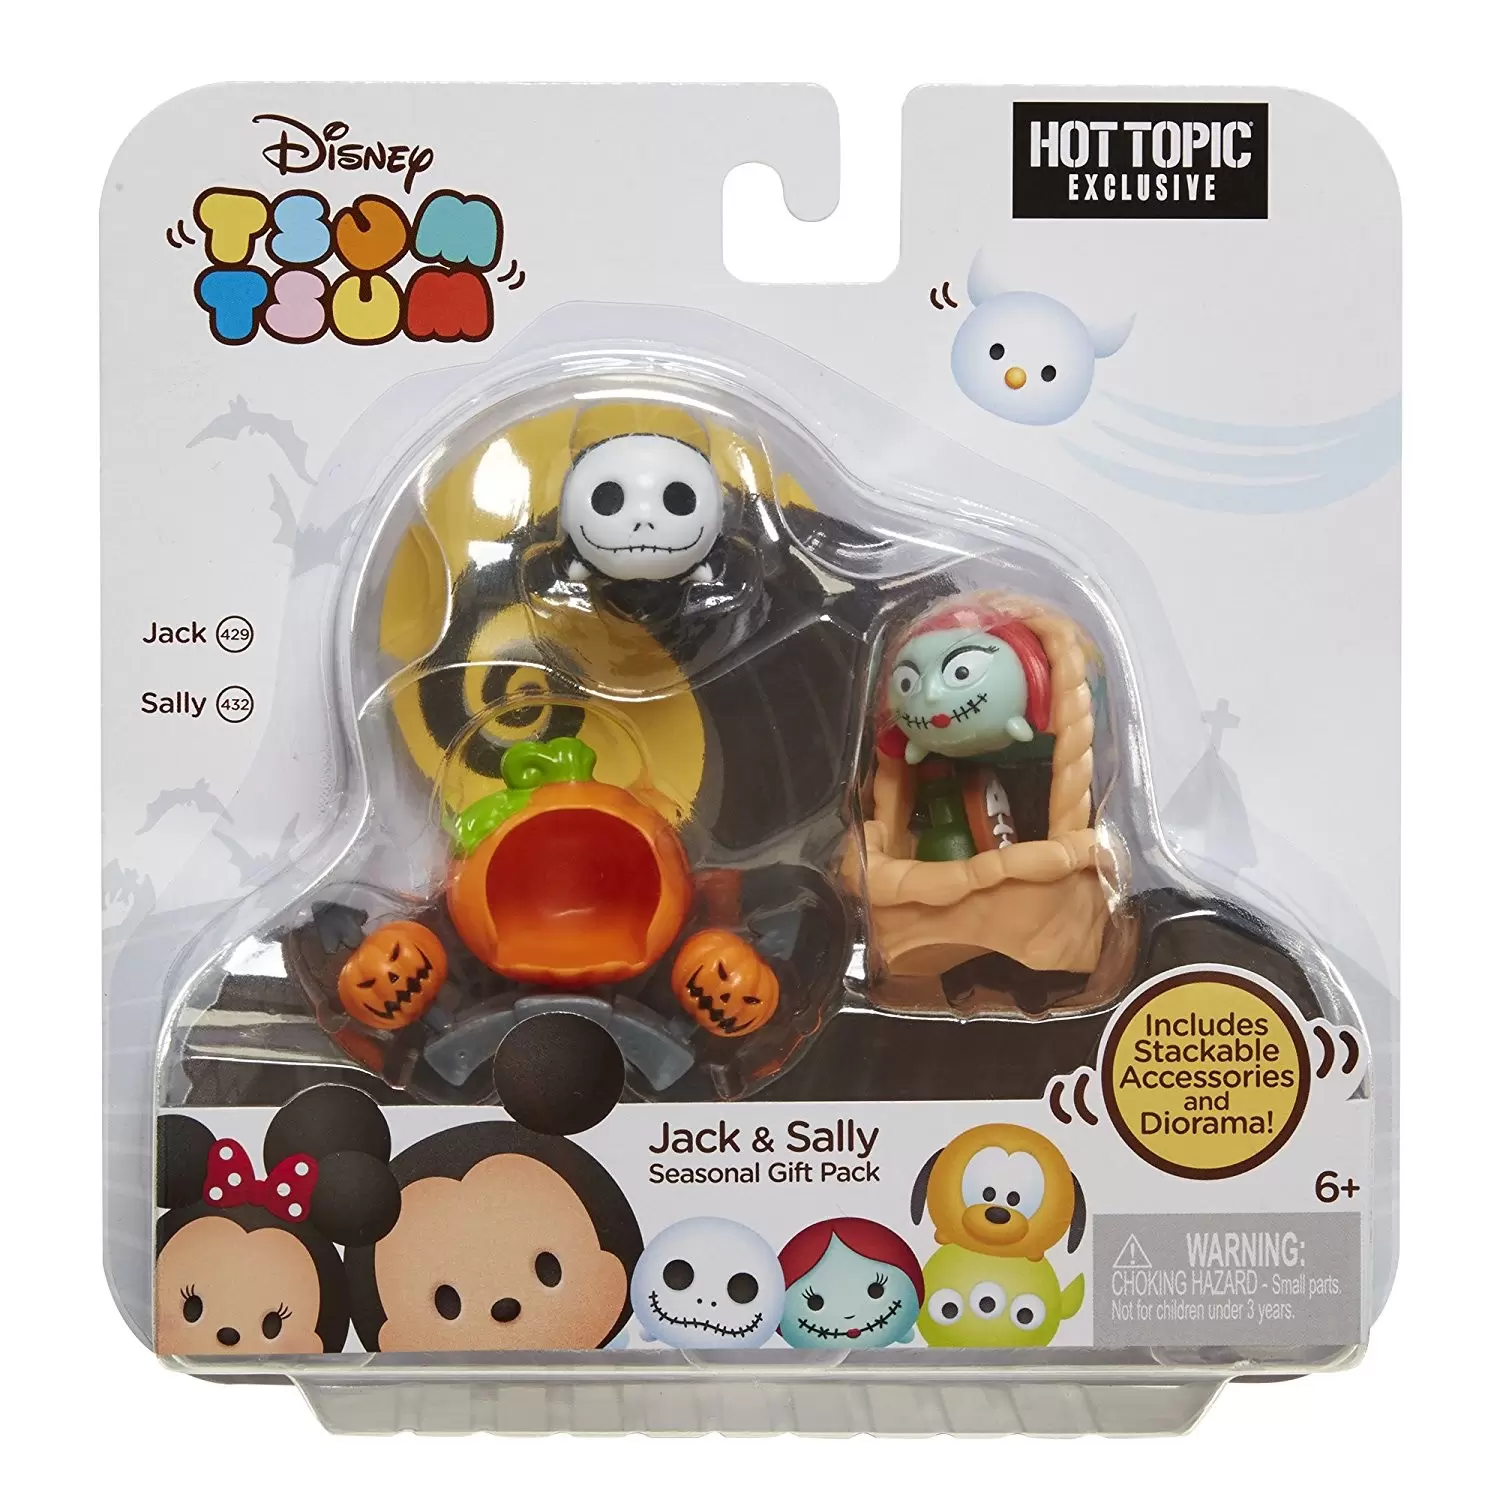 Tsum Tsum Jakks Pacific Exclusives And Sets - Hot Topic Exclusive Nightmare Before Christmas Tsum Tsum Set